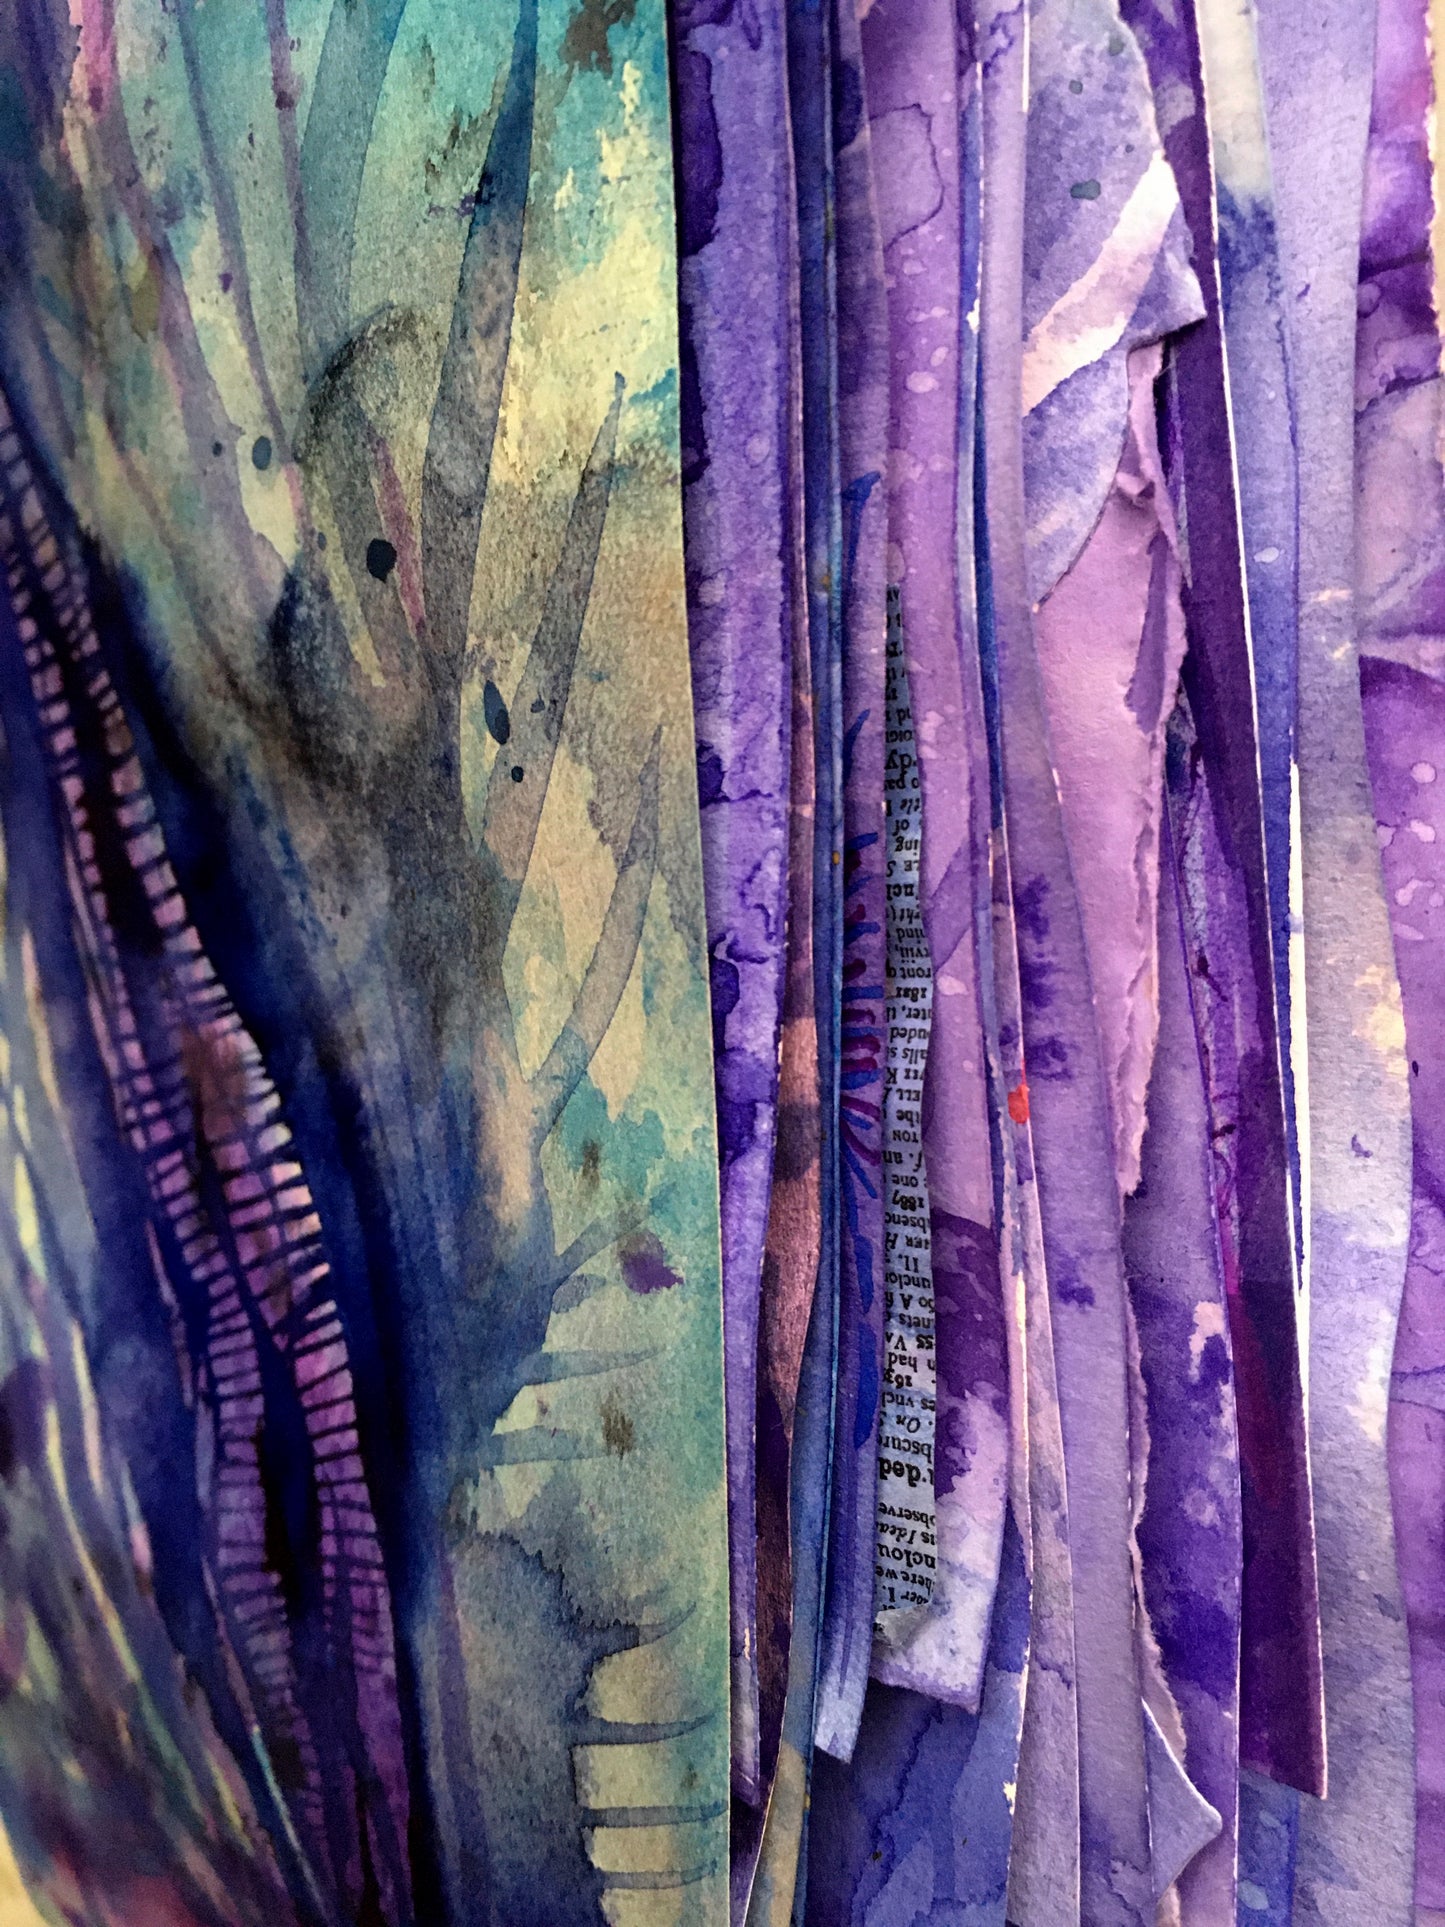 Painted Paper Bundles for Mixed Media Collage | "Midnight Moonlight" |